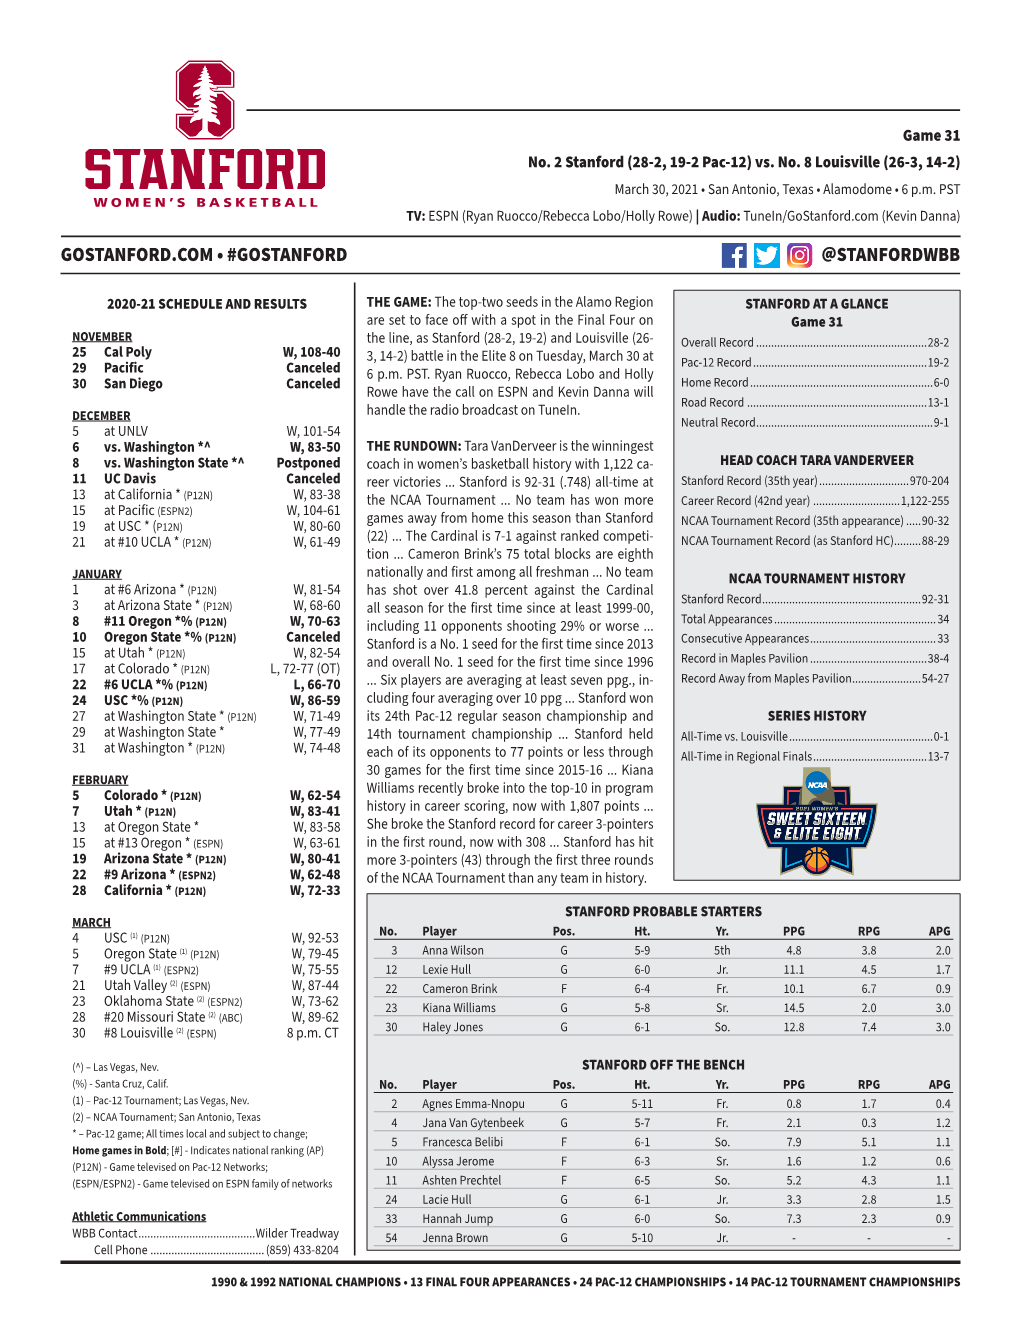 Stanford Game Notes